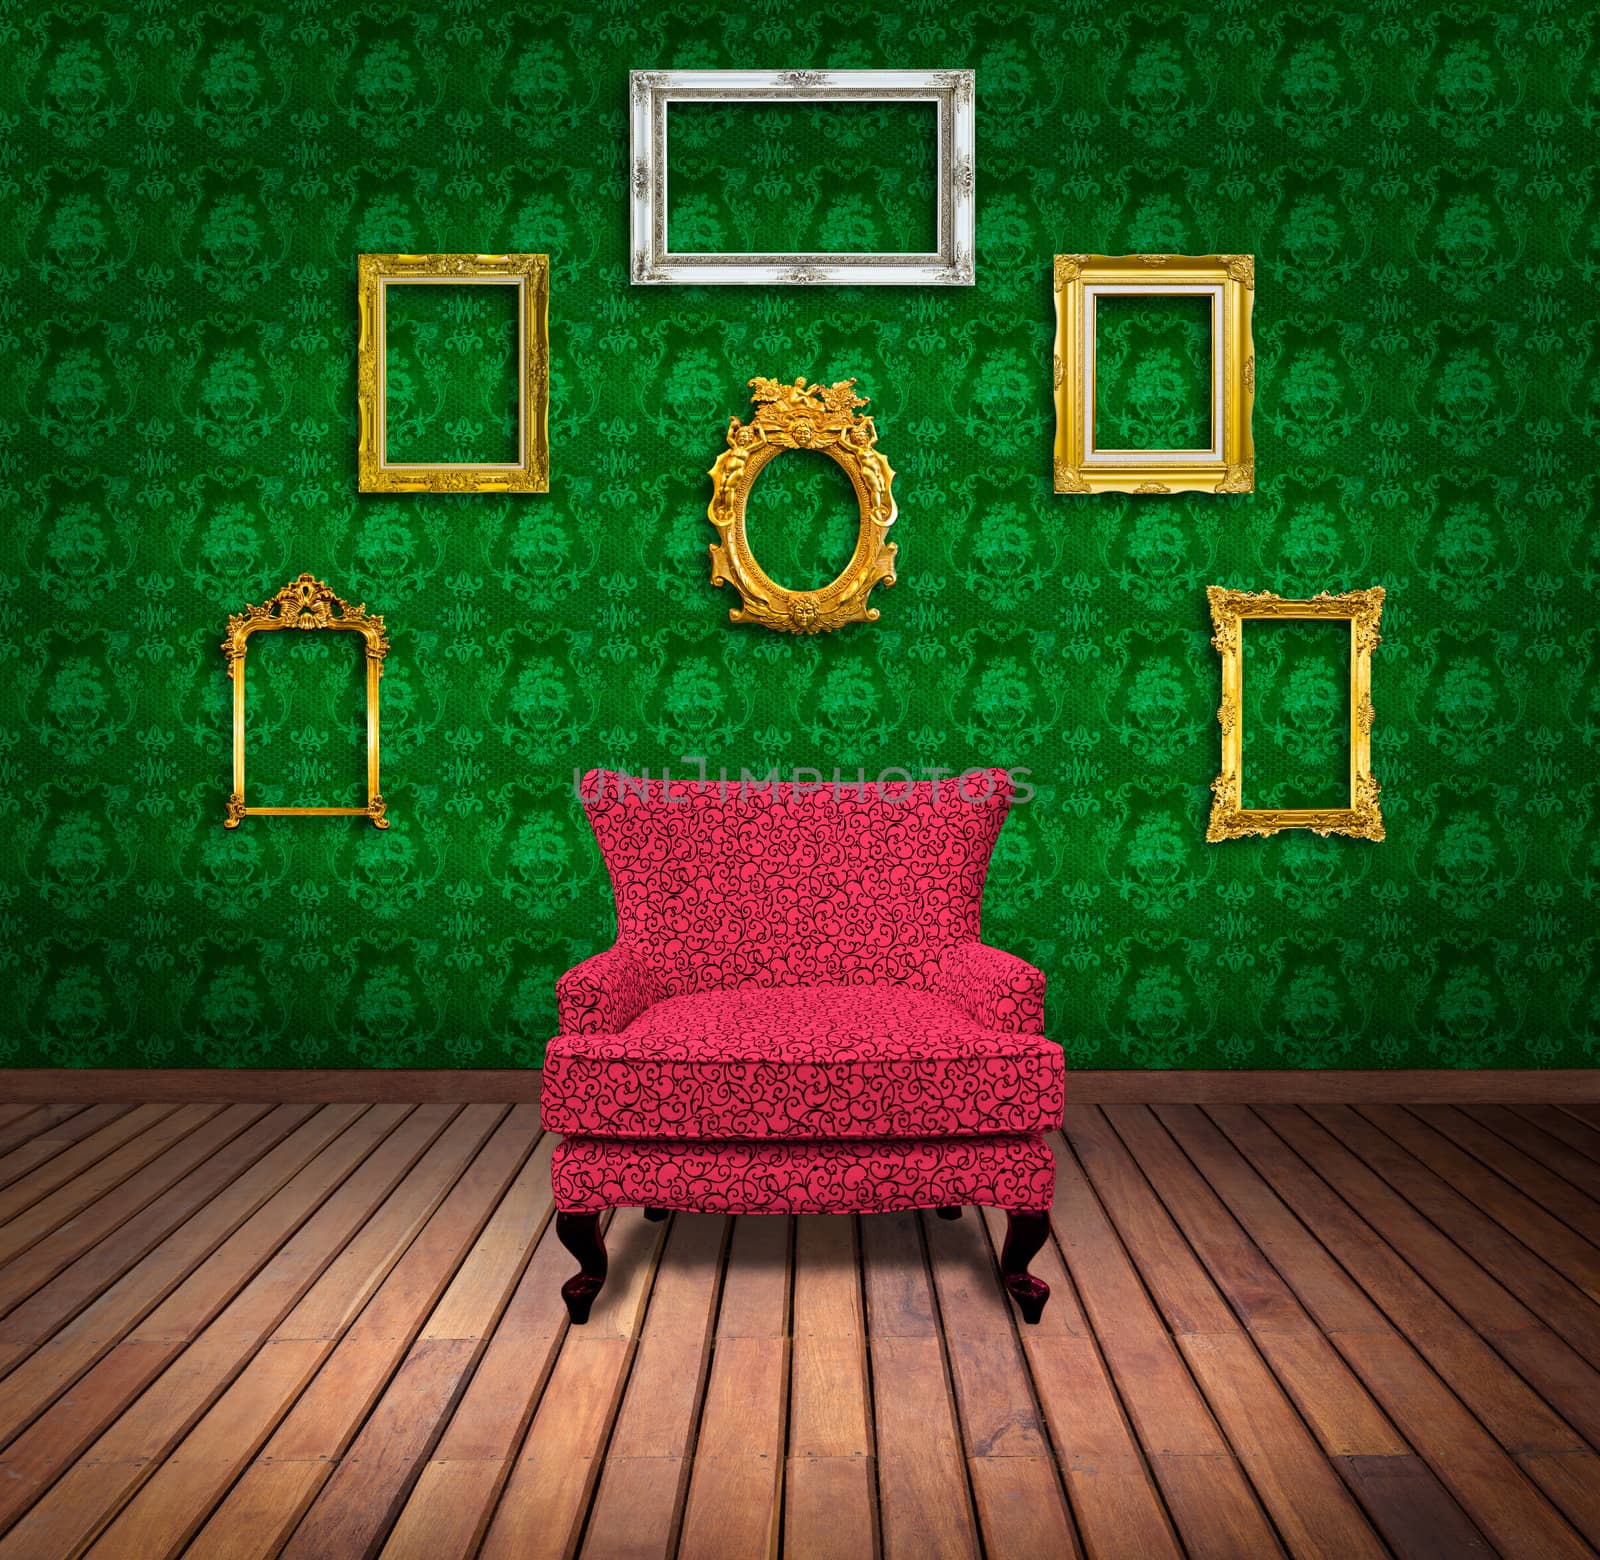 Sofa and frame in green wallpaper room by tungphoto